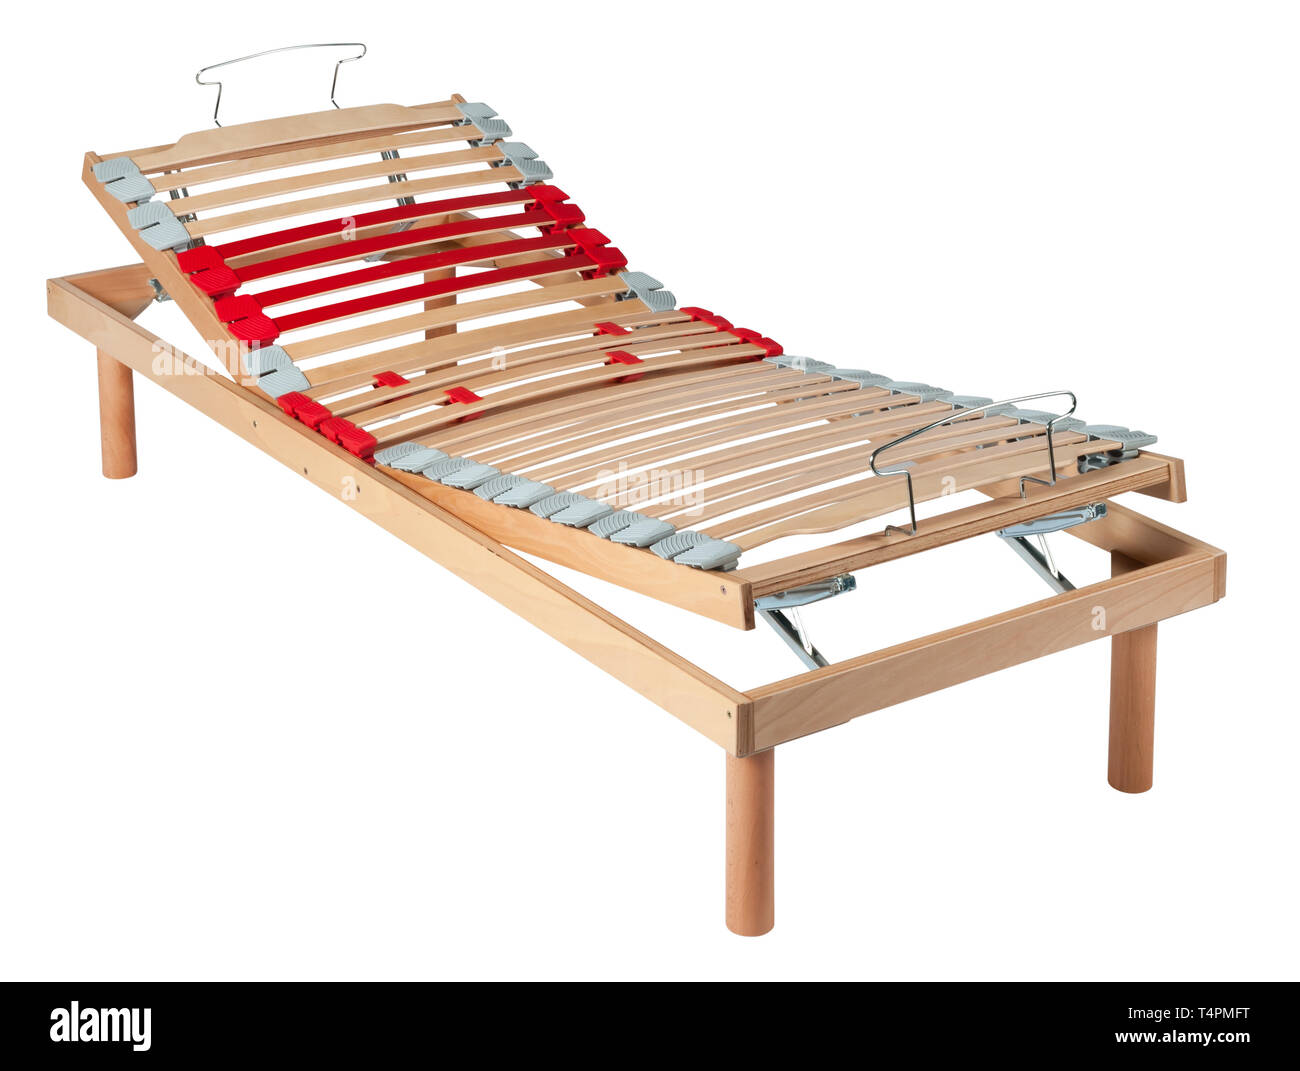 Single wooden orthopaedic net bed with double manual movements or adjustable mechanisms isolated on white with no bedding Stock Photo